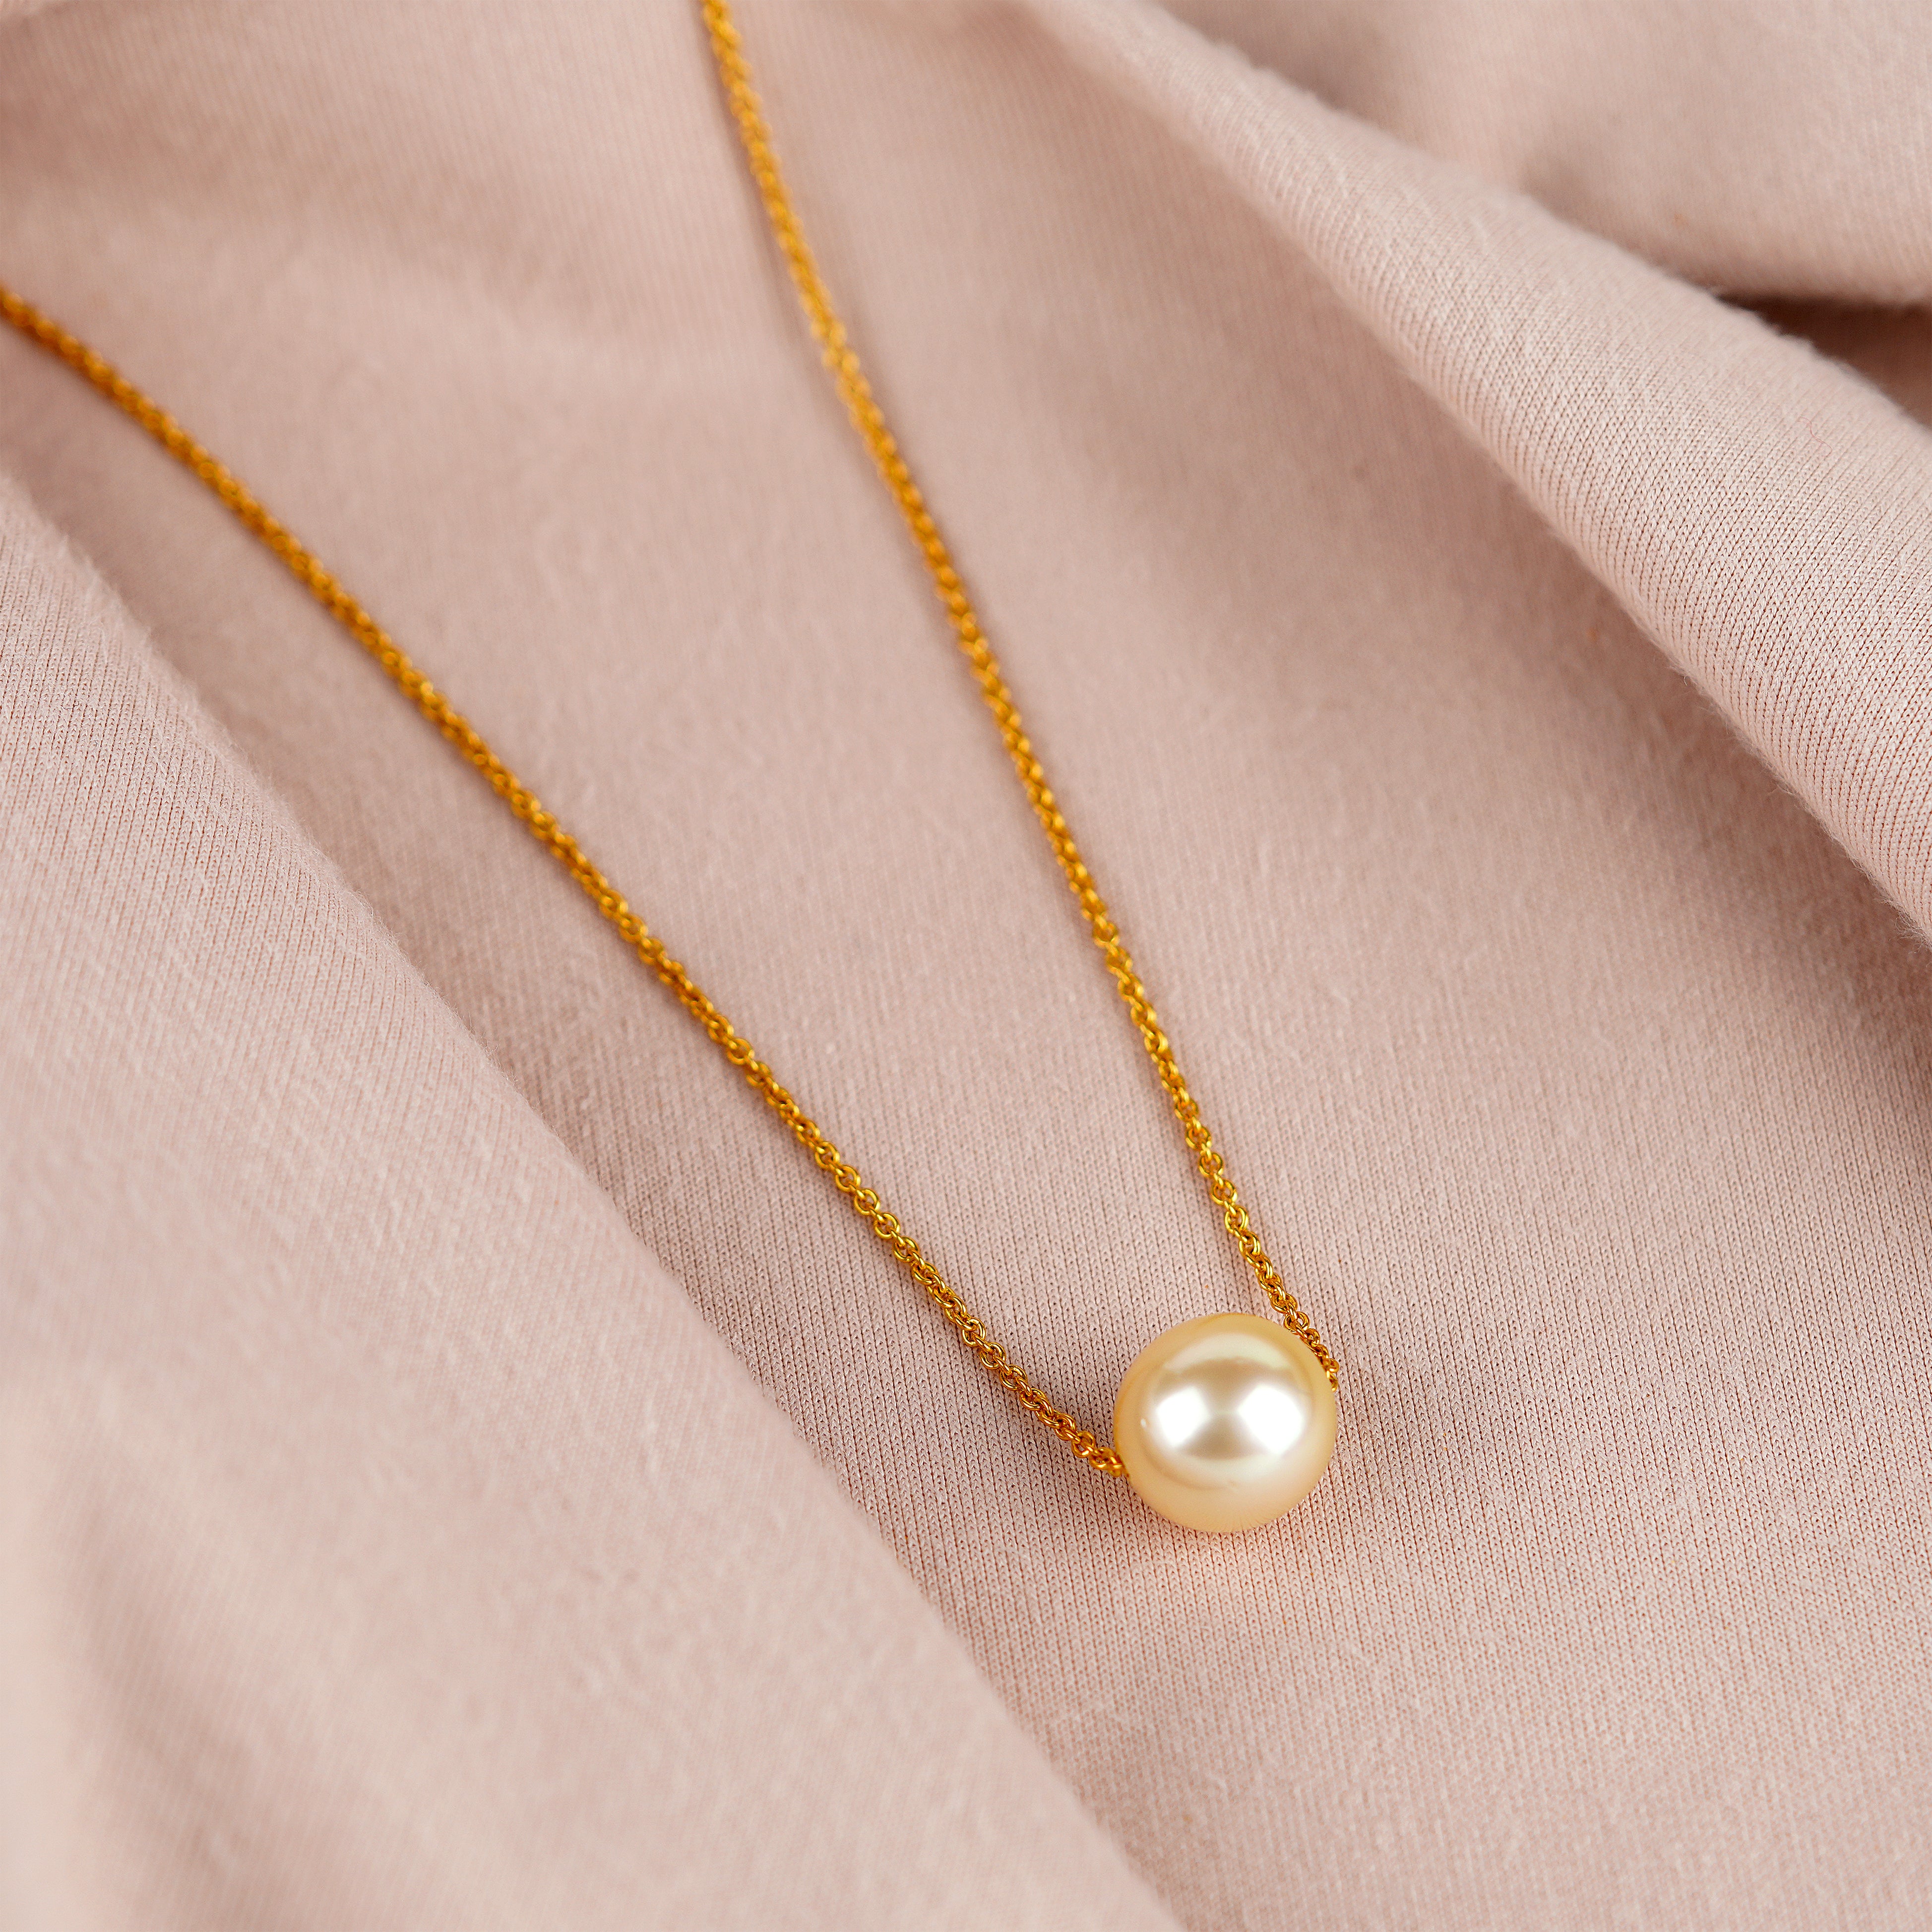 22k Gold Chain Adorned with South Sea Pearl